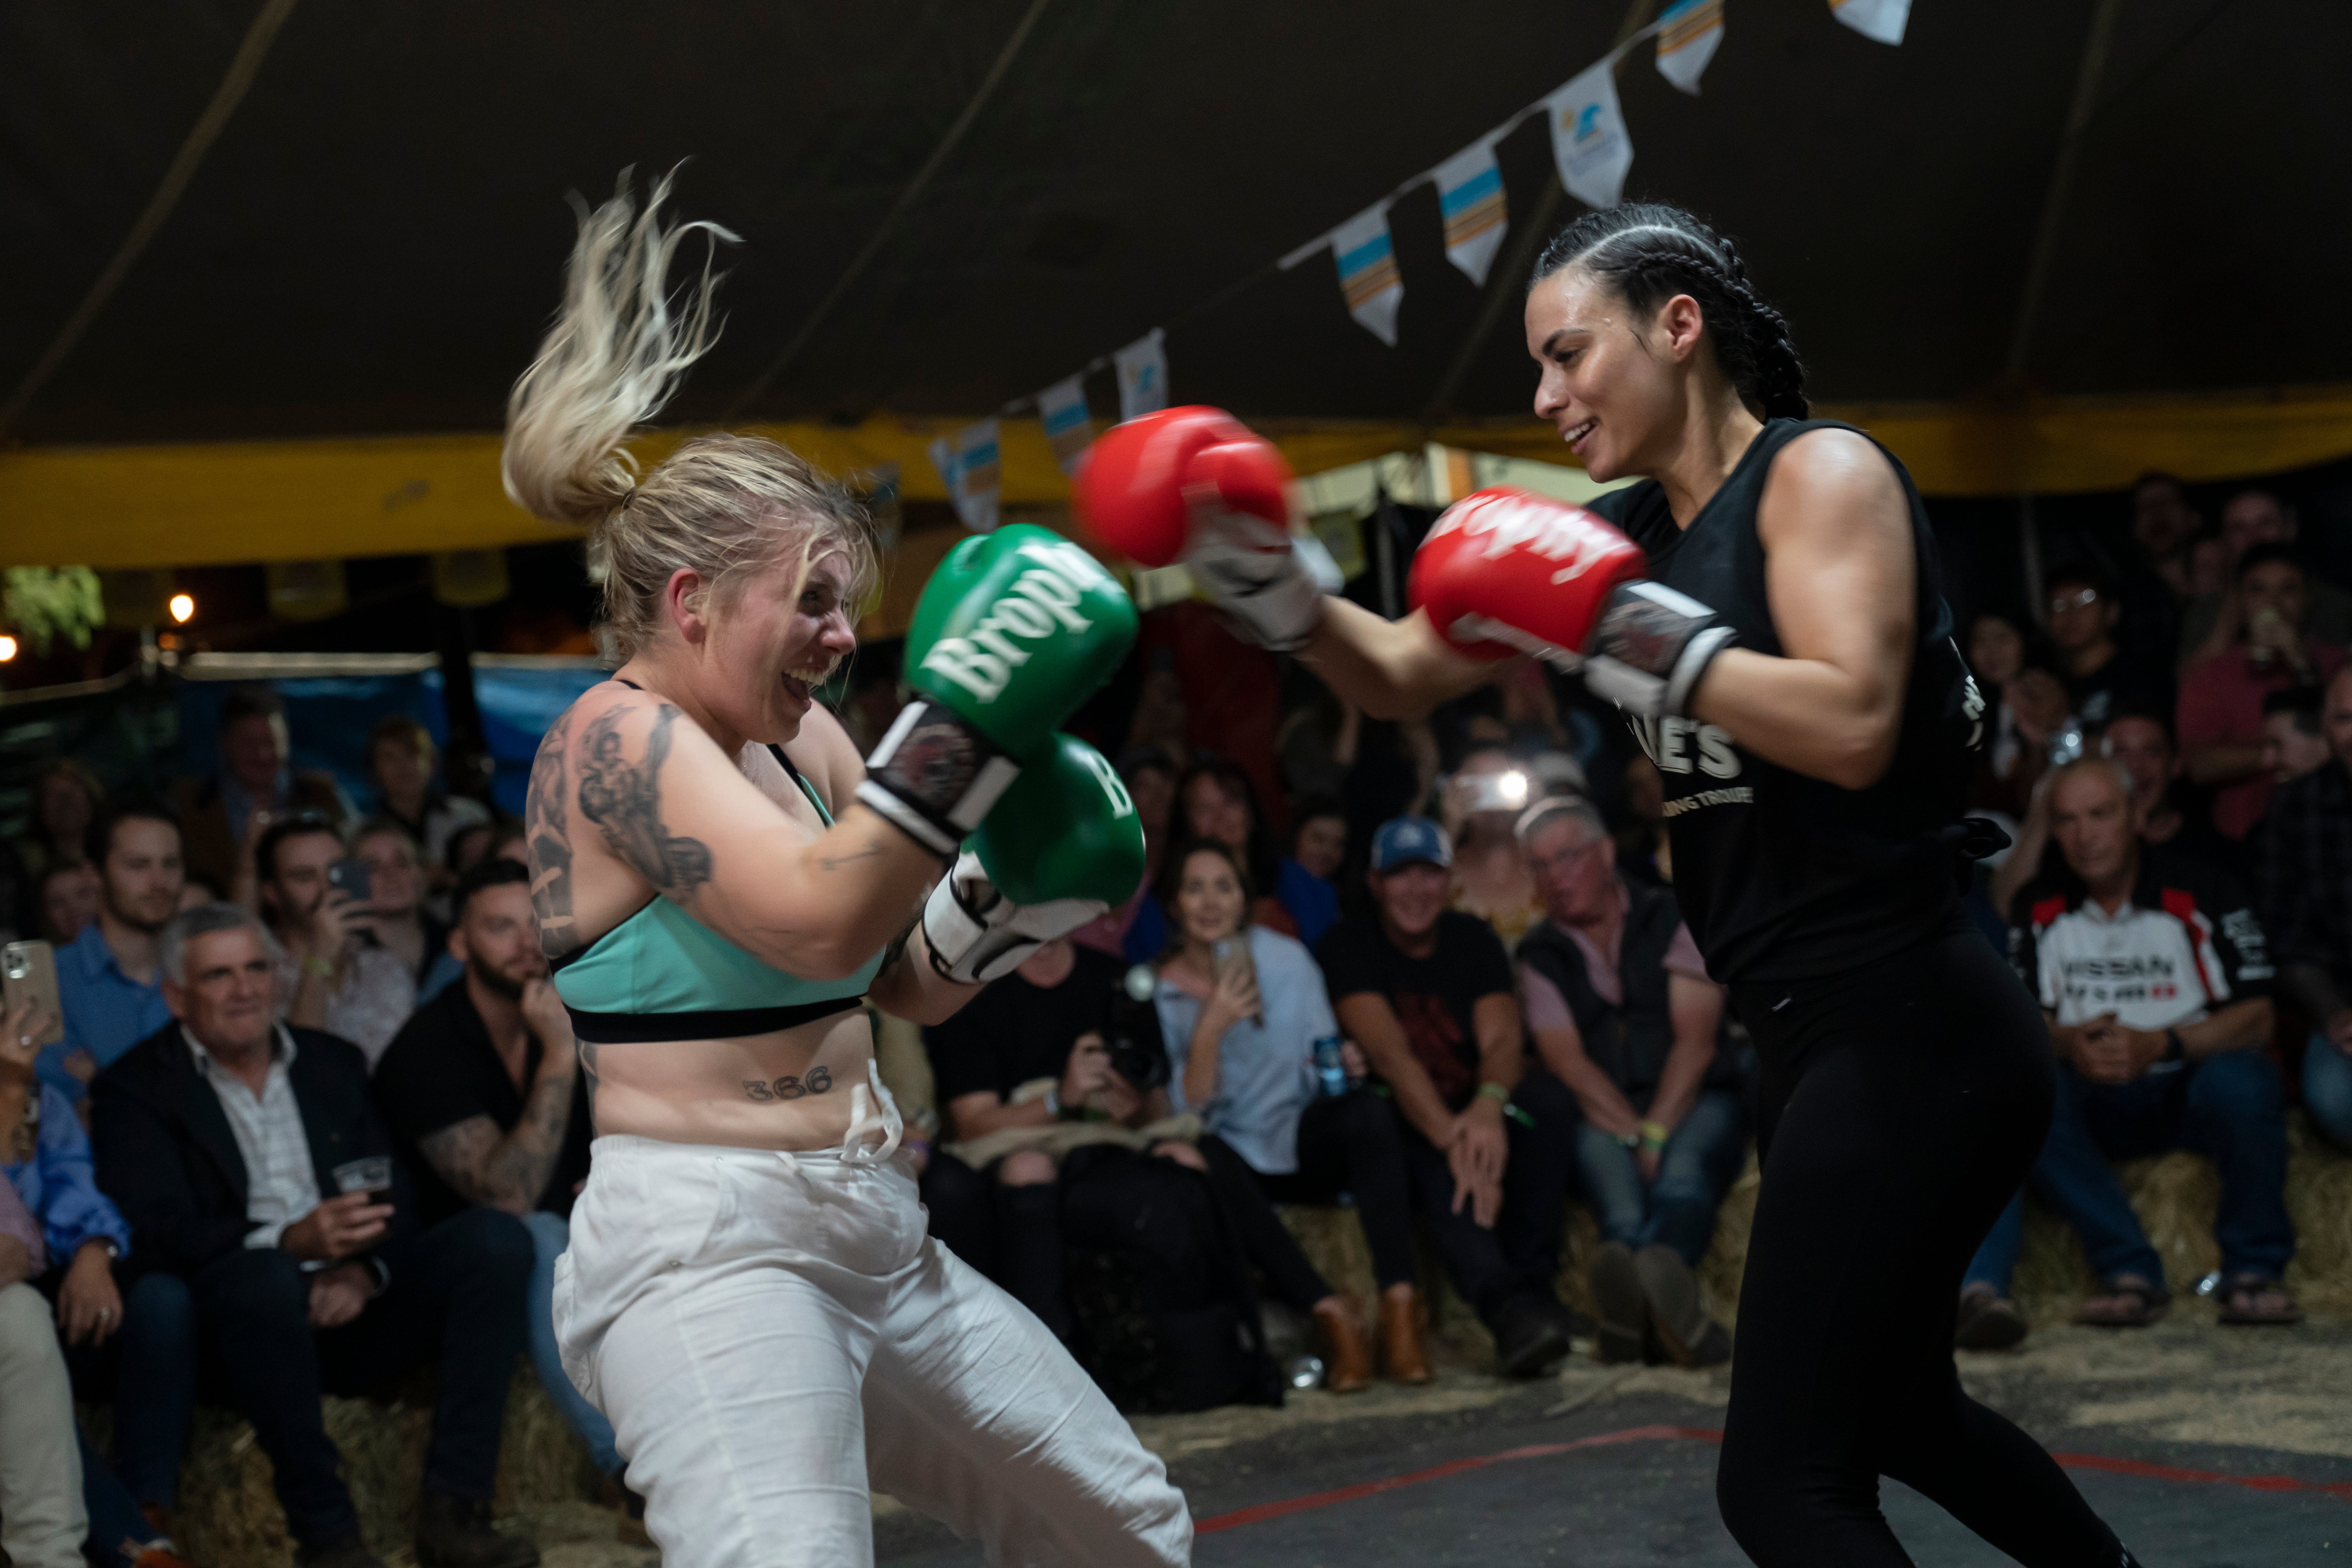 Soraya ‘Miss Mauler’ Johnston (right) fights a volunteer from the audience